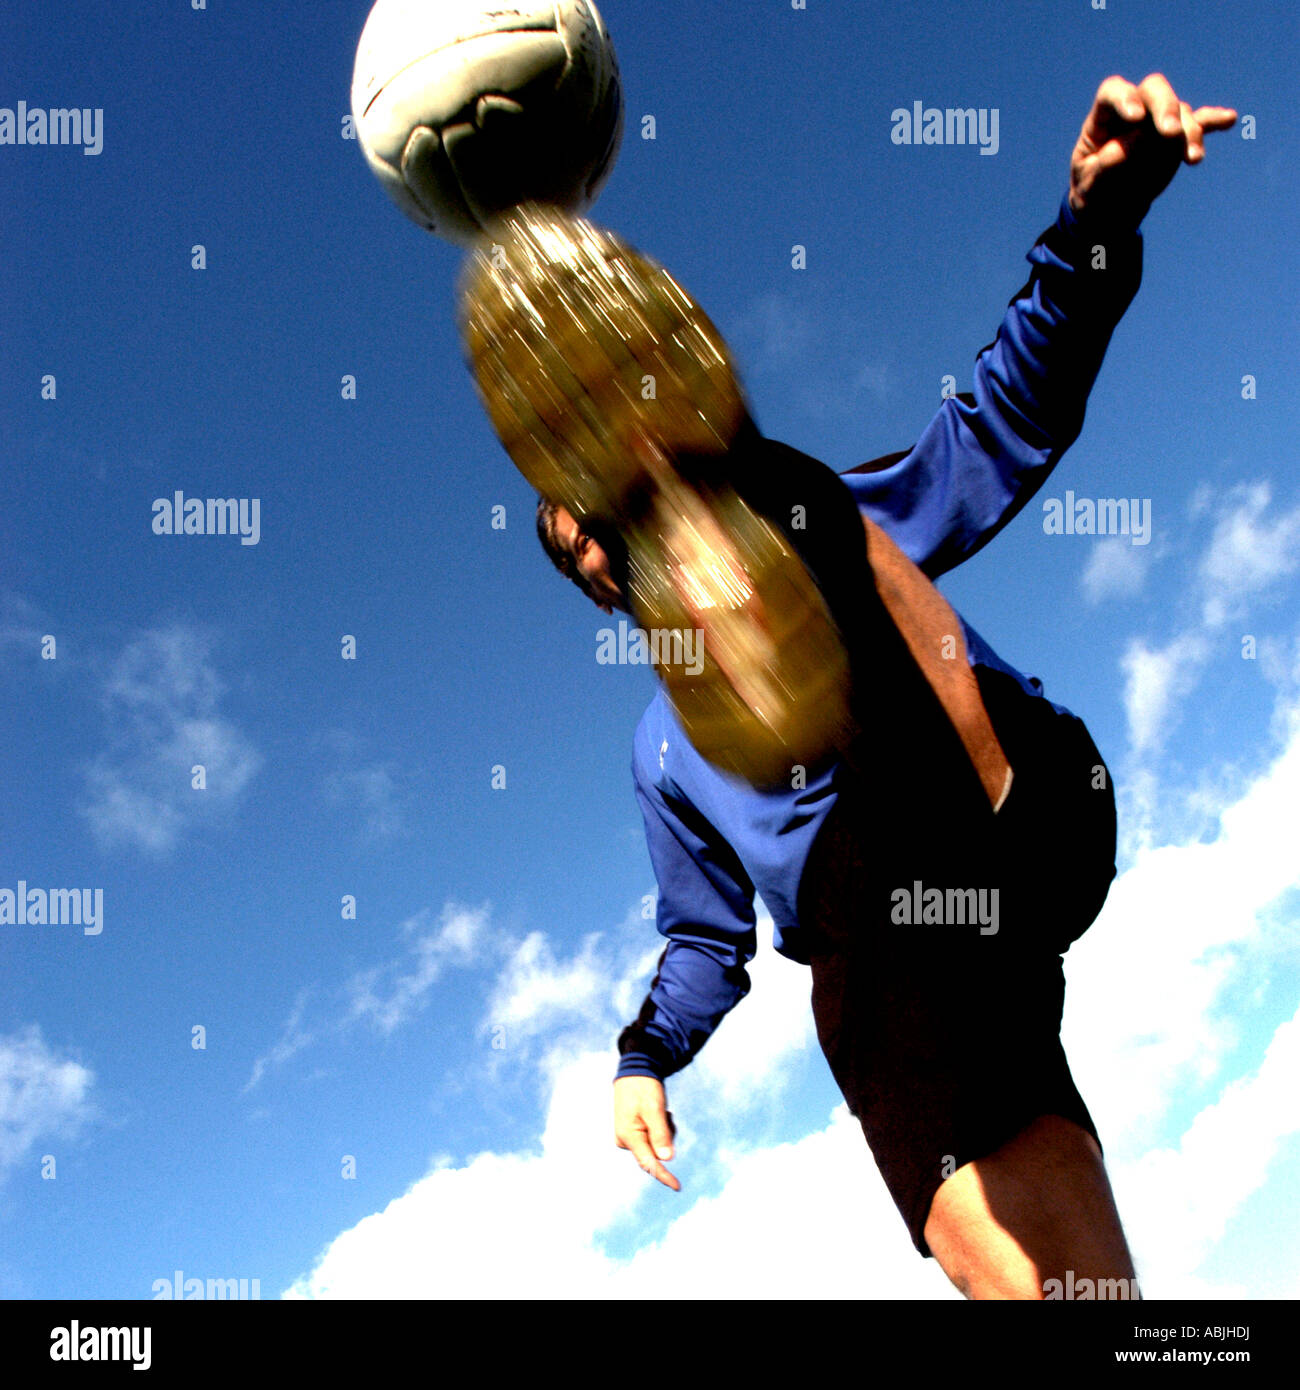 Football player kicking a football. Picture by Patrick Steel patricksteel Stock Photo